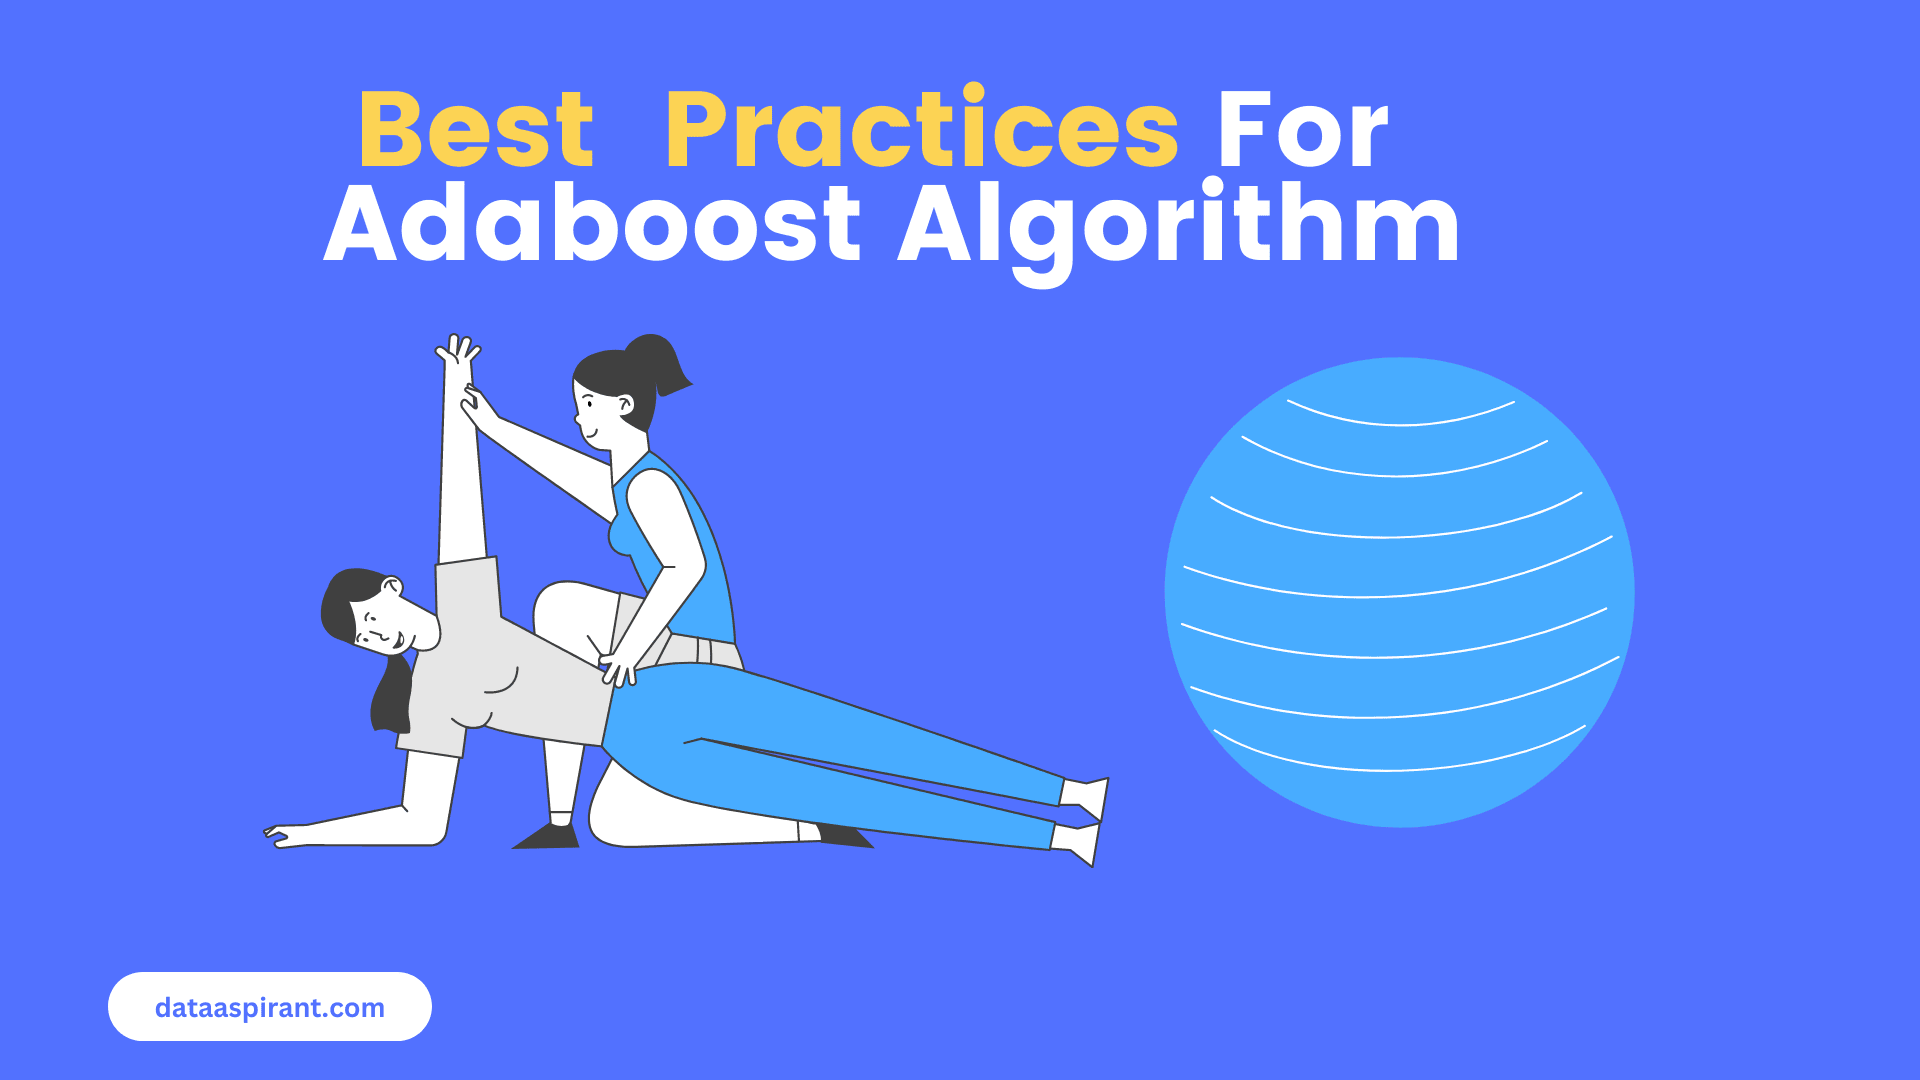 Adaboost: Best Practices and Common Pitfalls